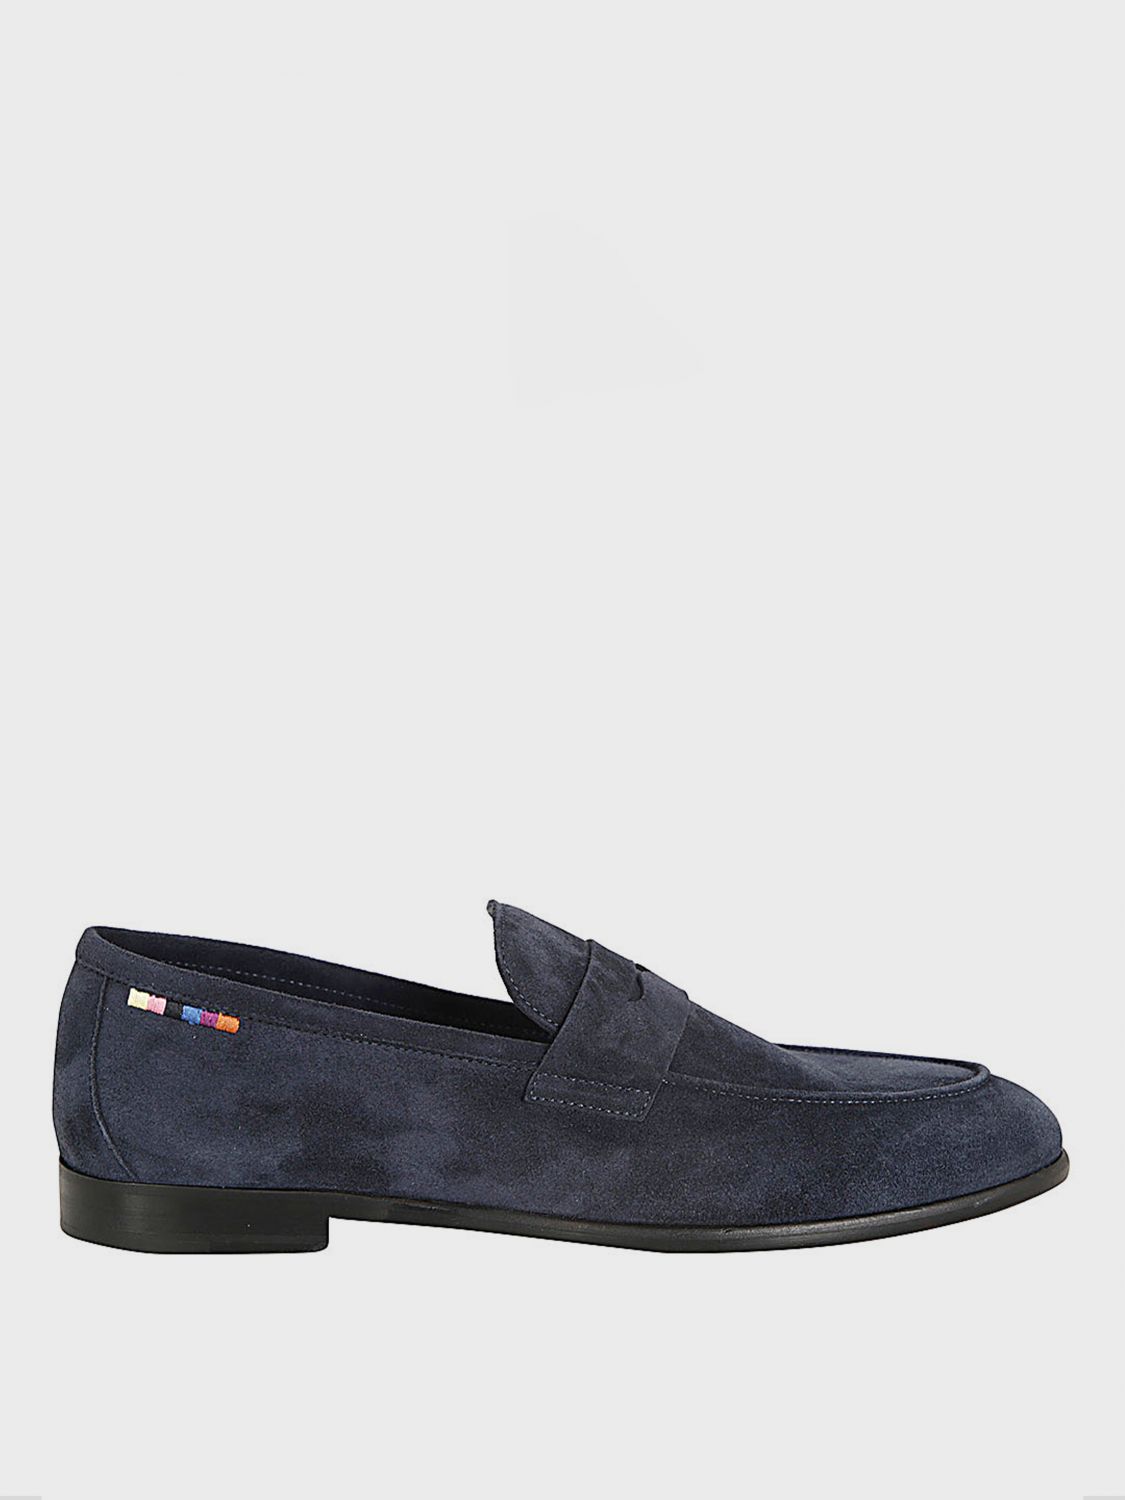 Paul Smith Loafers PAUL SMITH Men color Blue